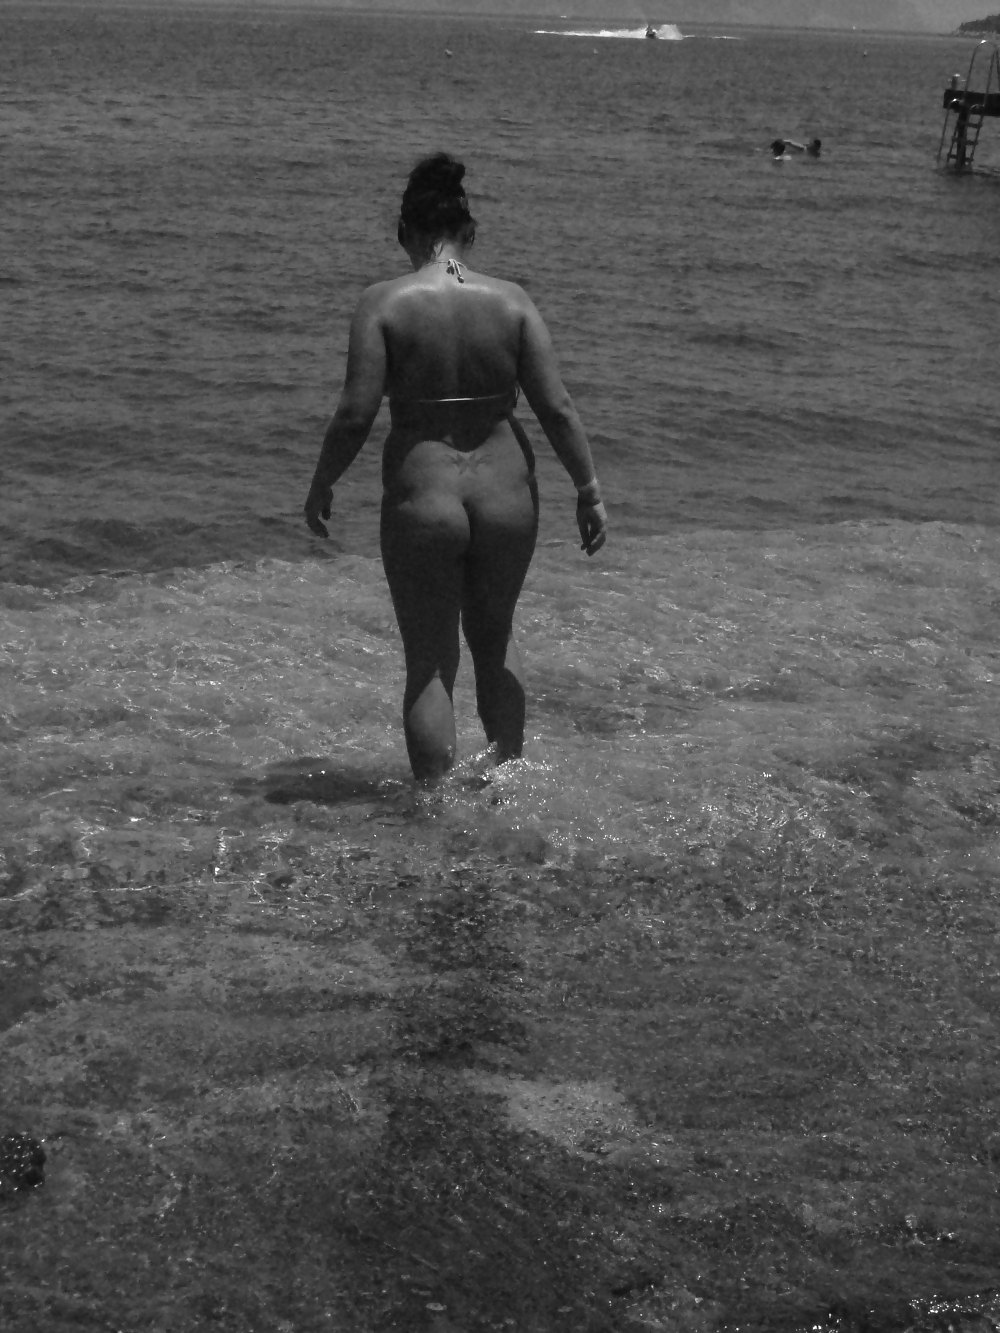 Me naked at the nudist beach #19796478